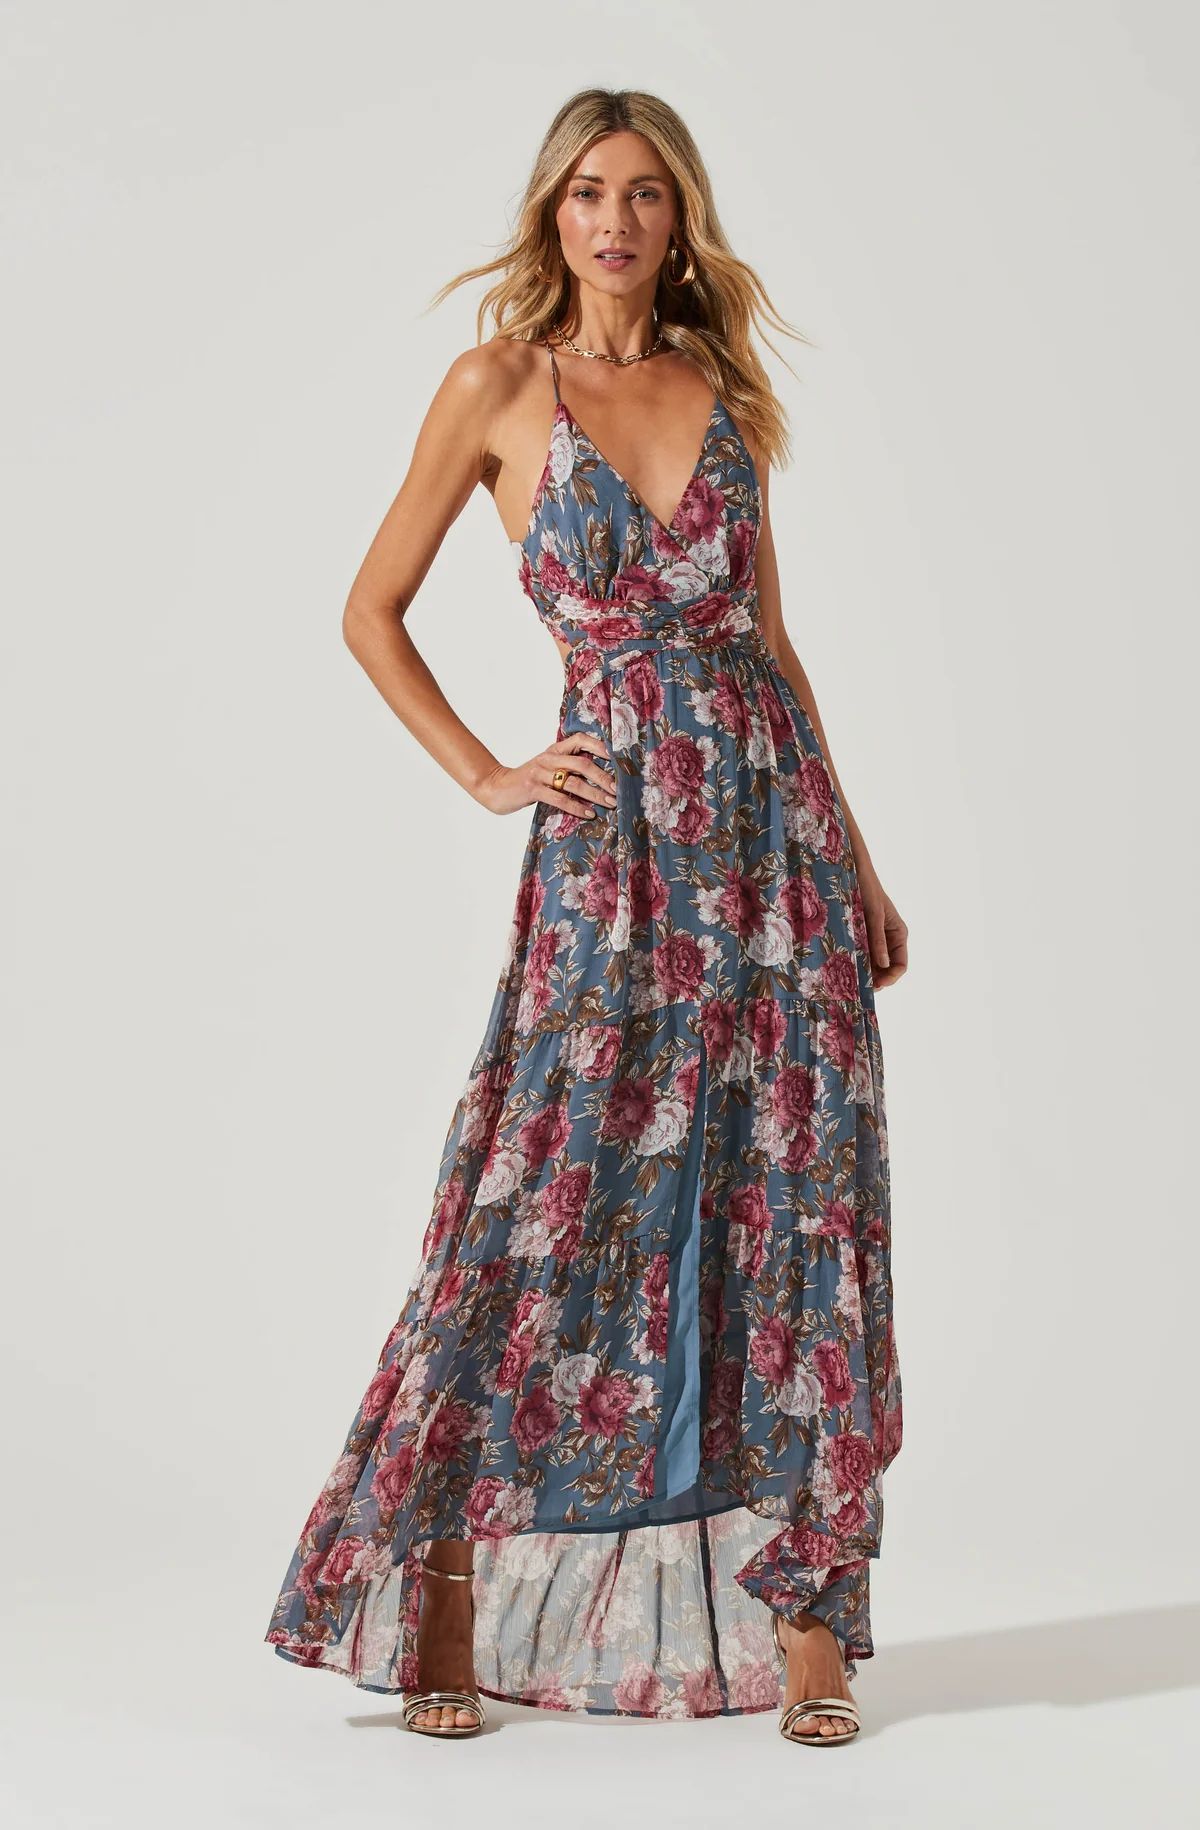 Frolic Floral Cutout Maxi Dress - TAUPE FUCHSIA MULTI FLORAL / XS | ASTR The Label (US)